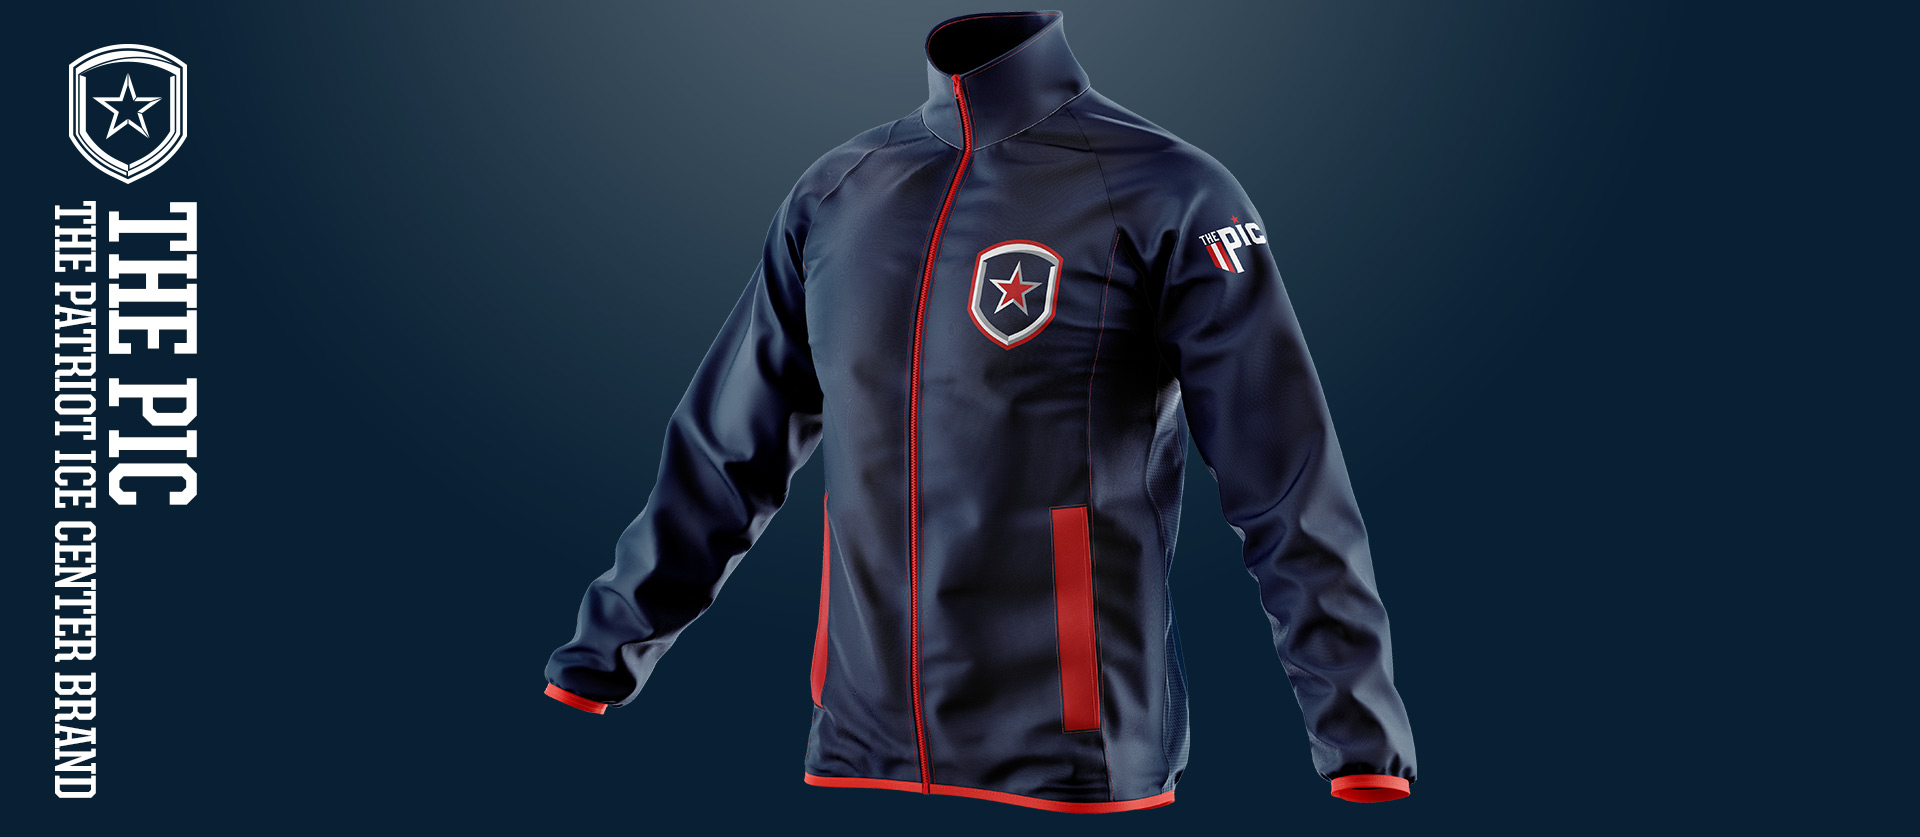 warmup jacket sports design for the patriot ice center